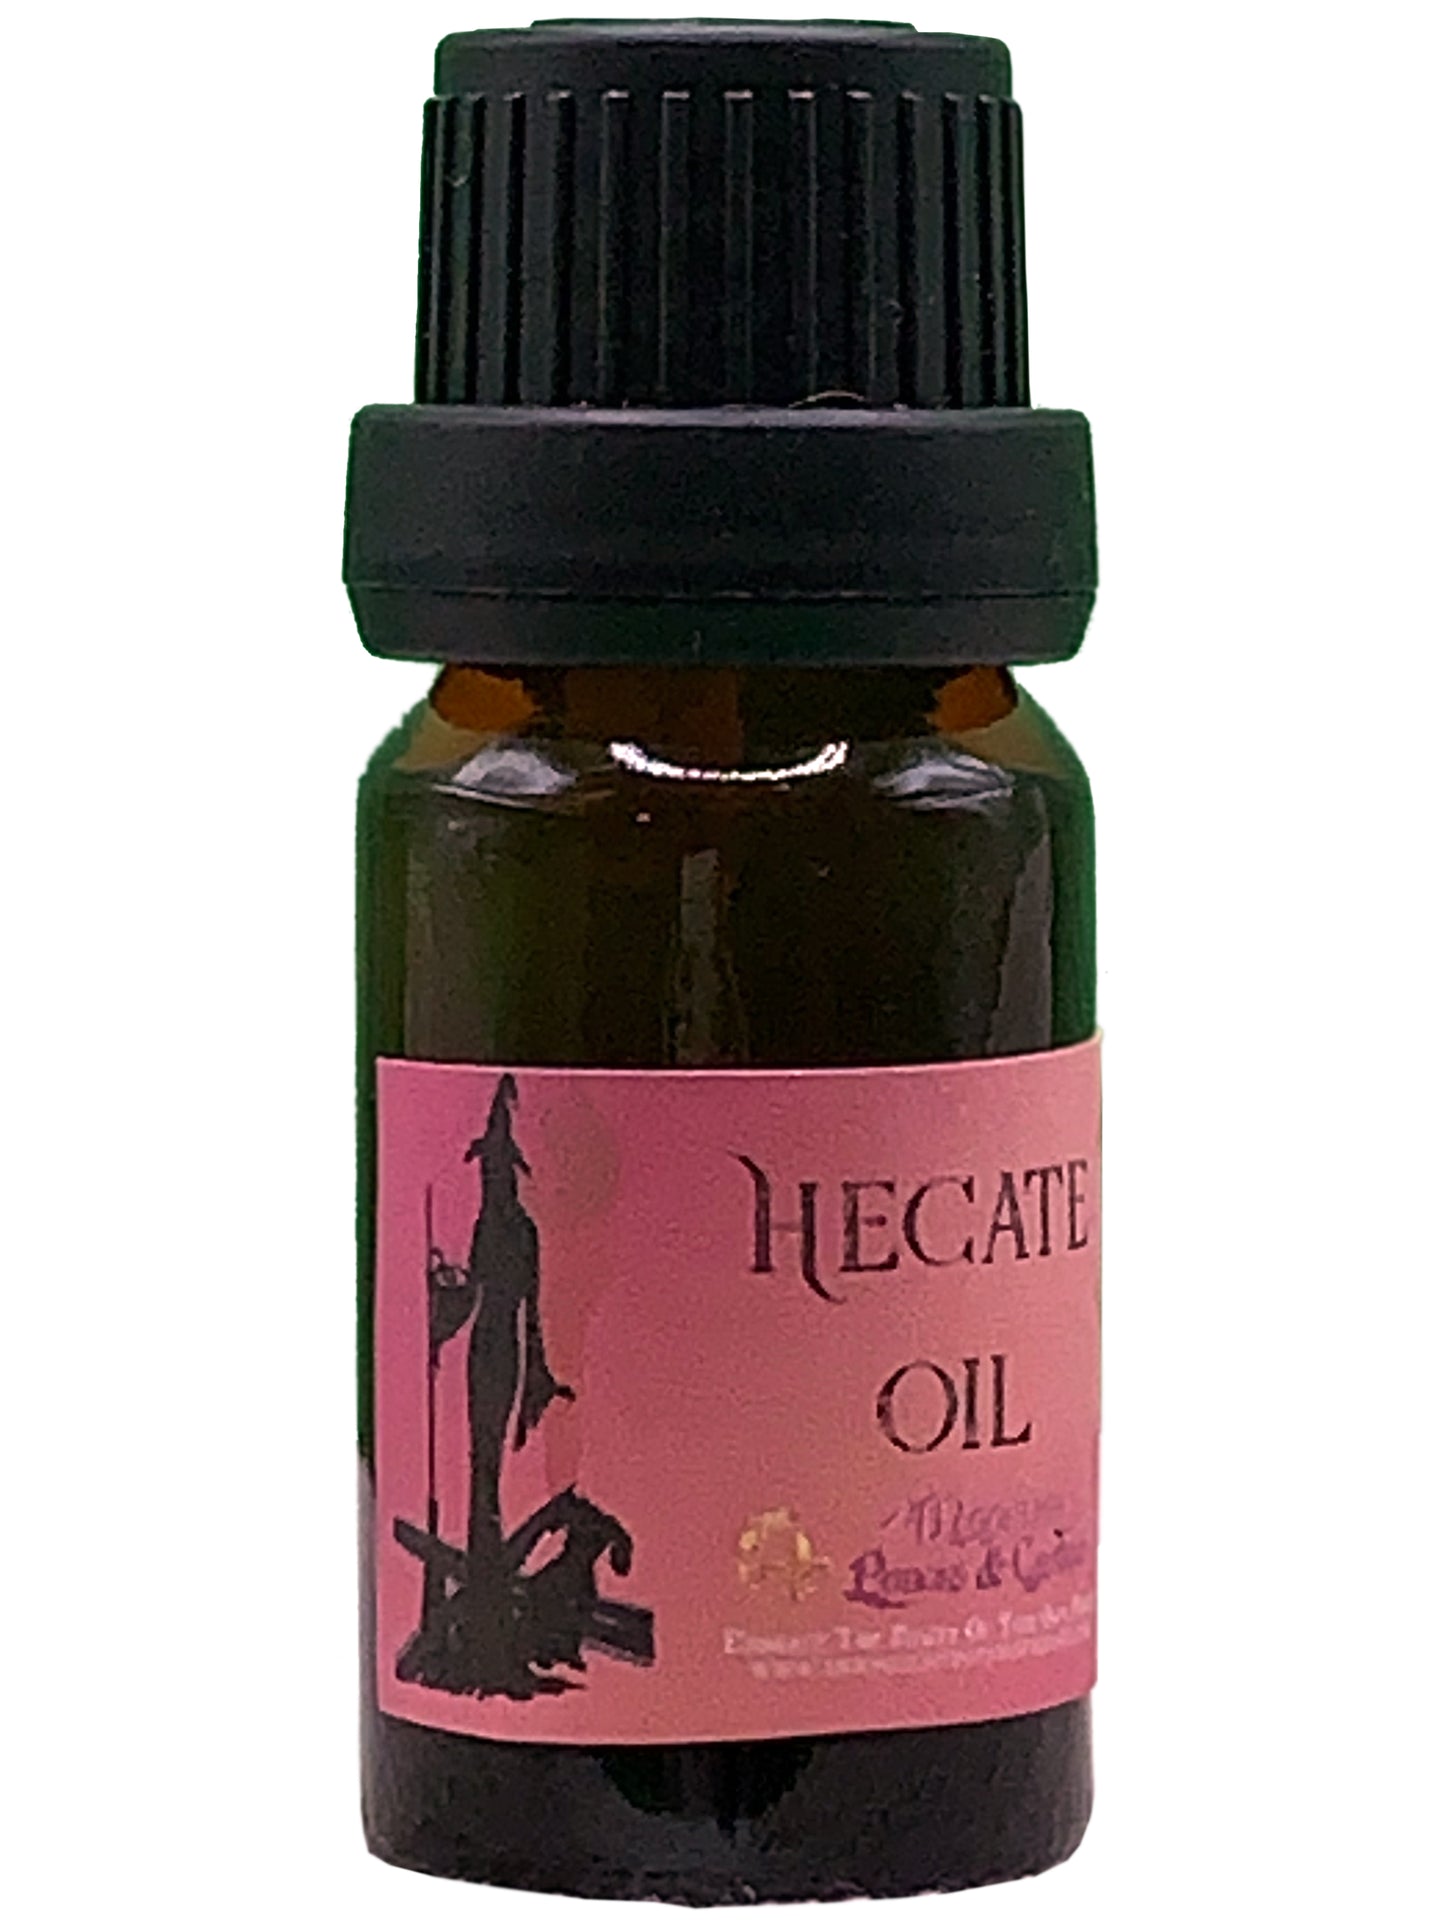 Hecate Oil - Moonlight Potions & Charms